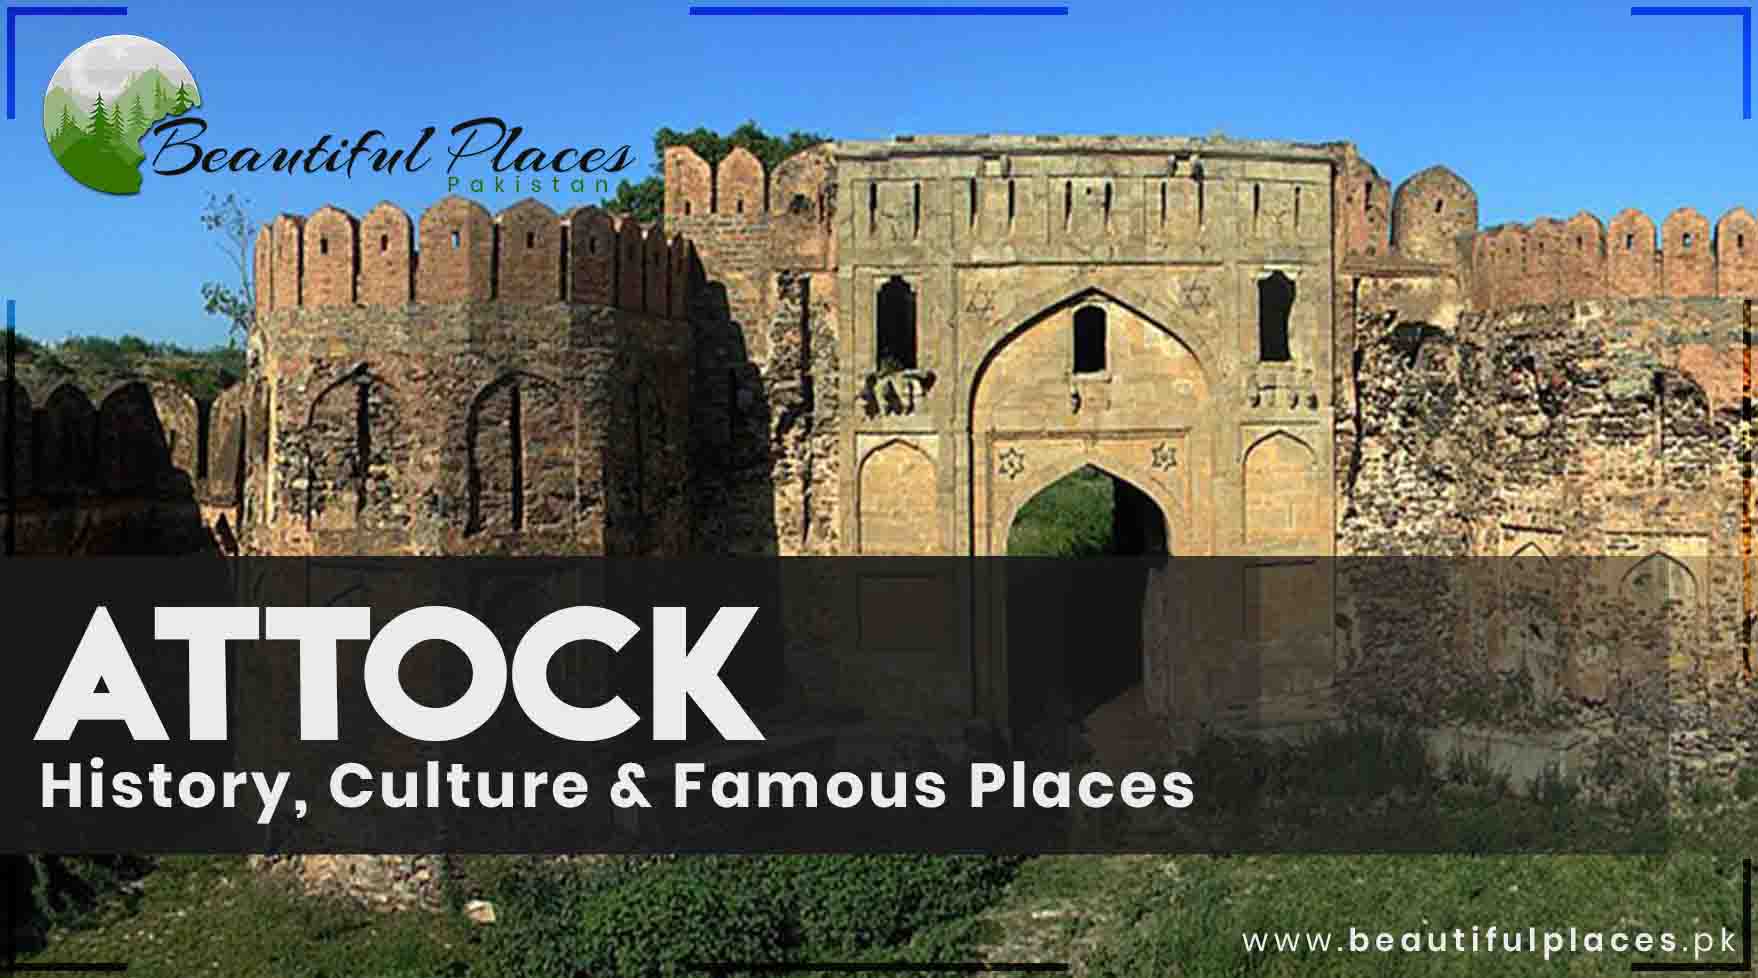 About Attock | History, Culture & Famous Places